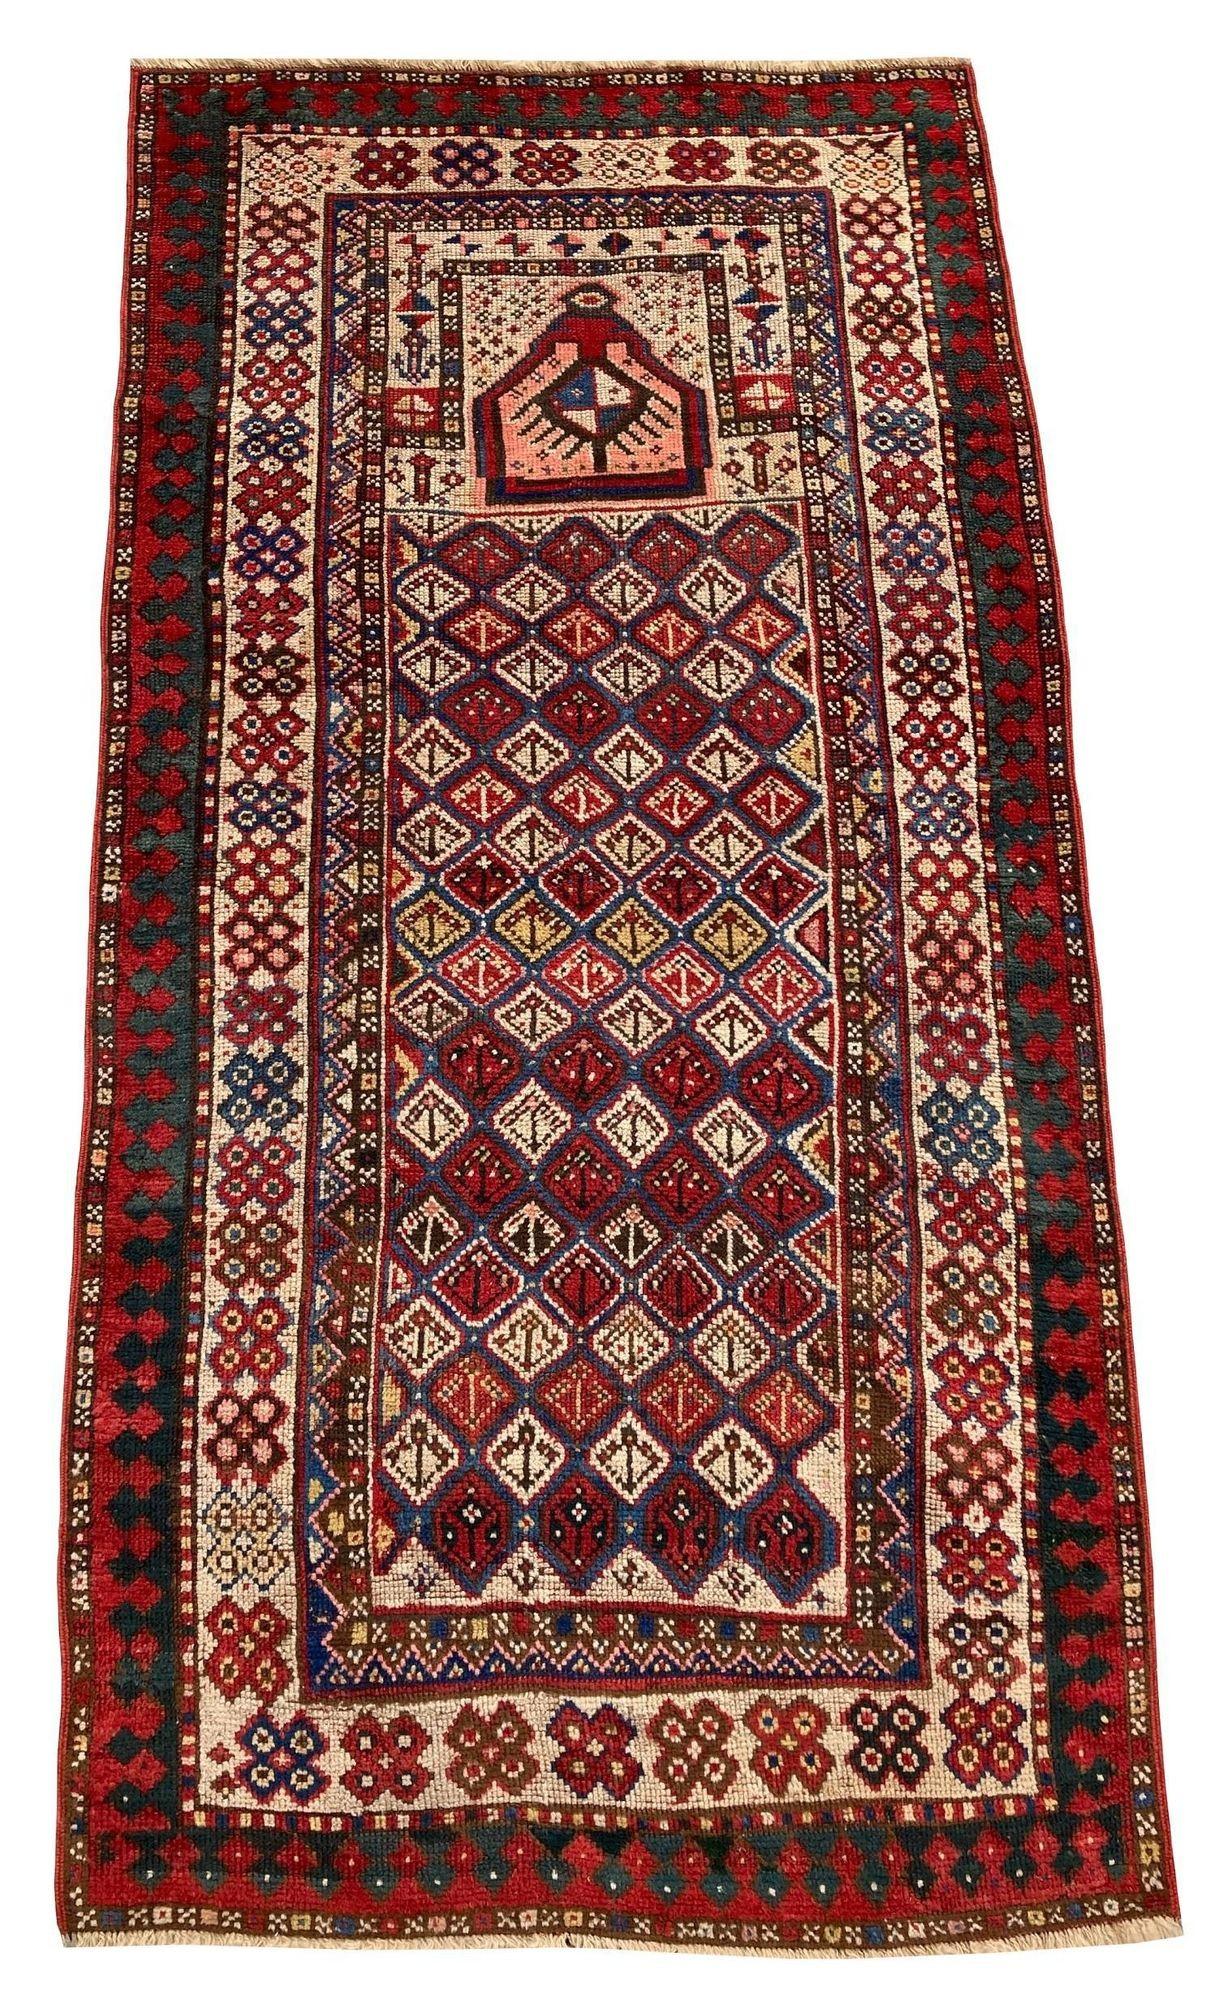 A beautiful little antique Gendje rug, handwoven in The Caucasus mountains of modern day Azerbaijan circa 1890. It features an unusual prayer rug design on a multicoloured lozenge field with an ivory border. Fabulous colours and highly